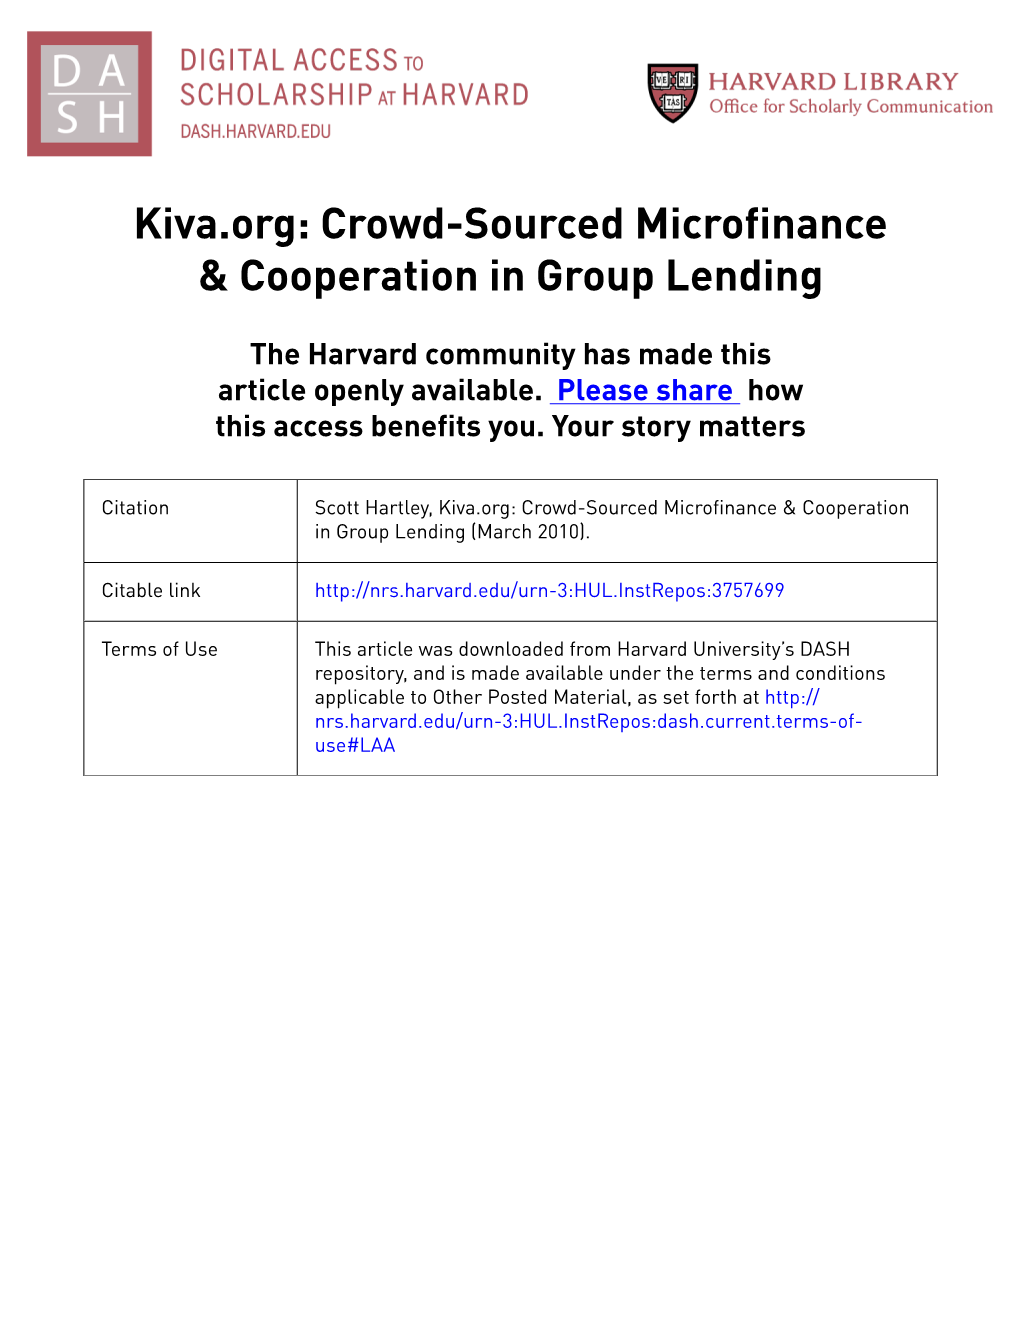 Kiva.Org: Crowd-Sourced Microfinance & Cooperation in Group Lending